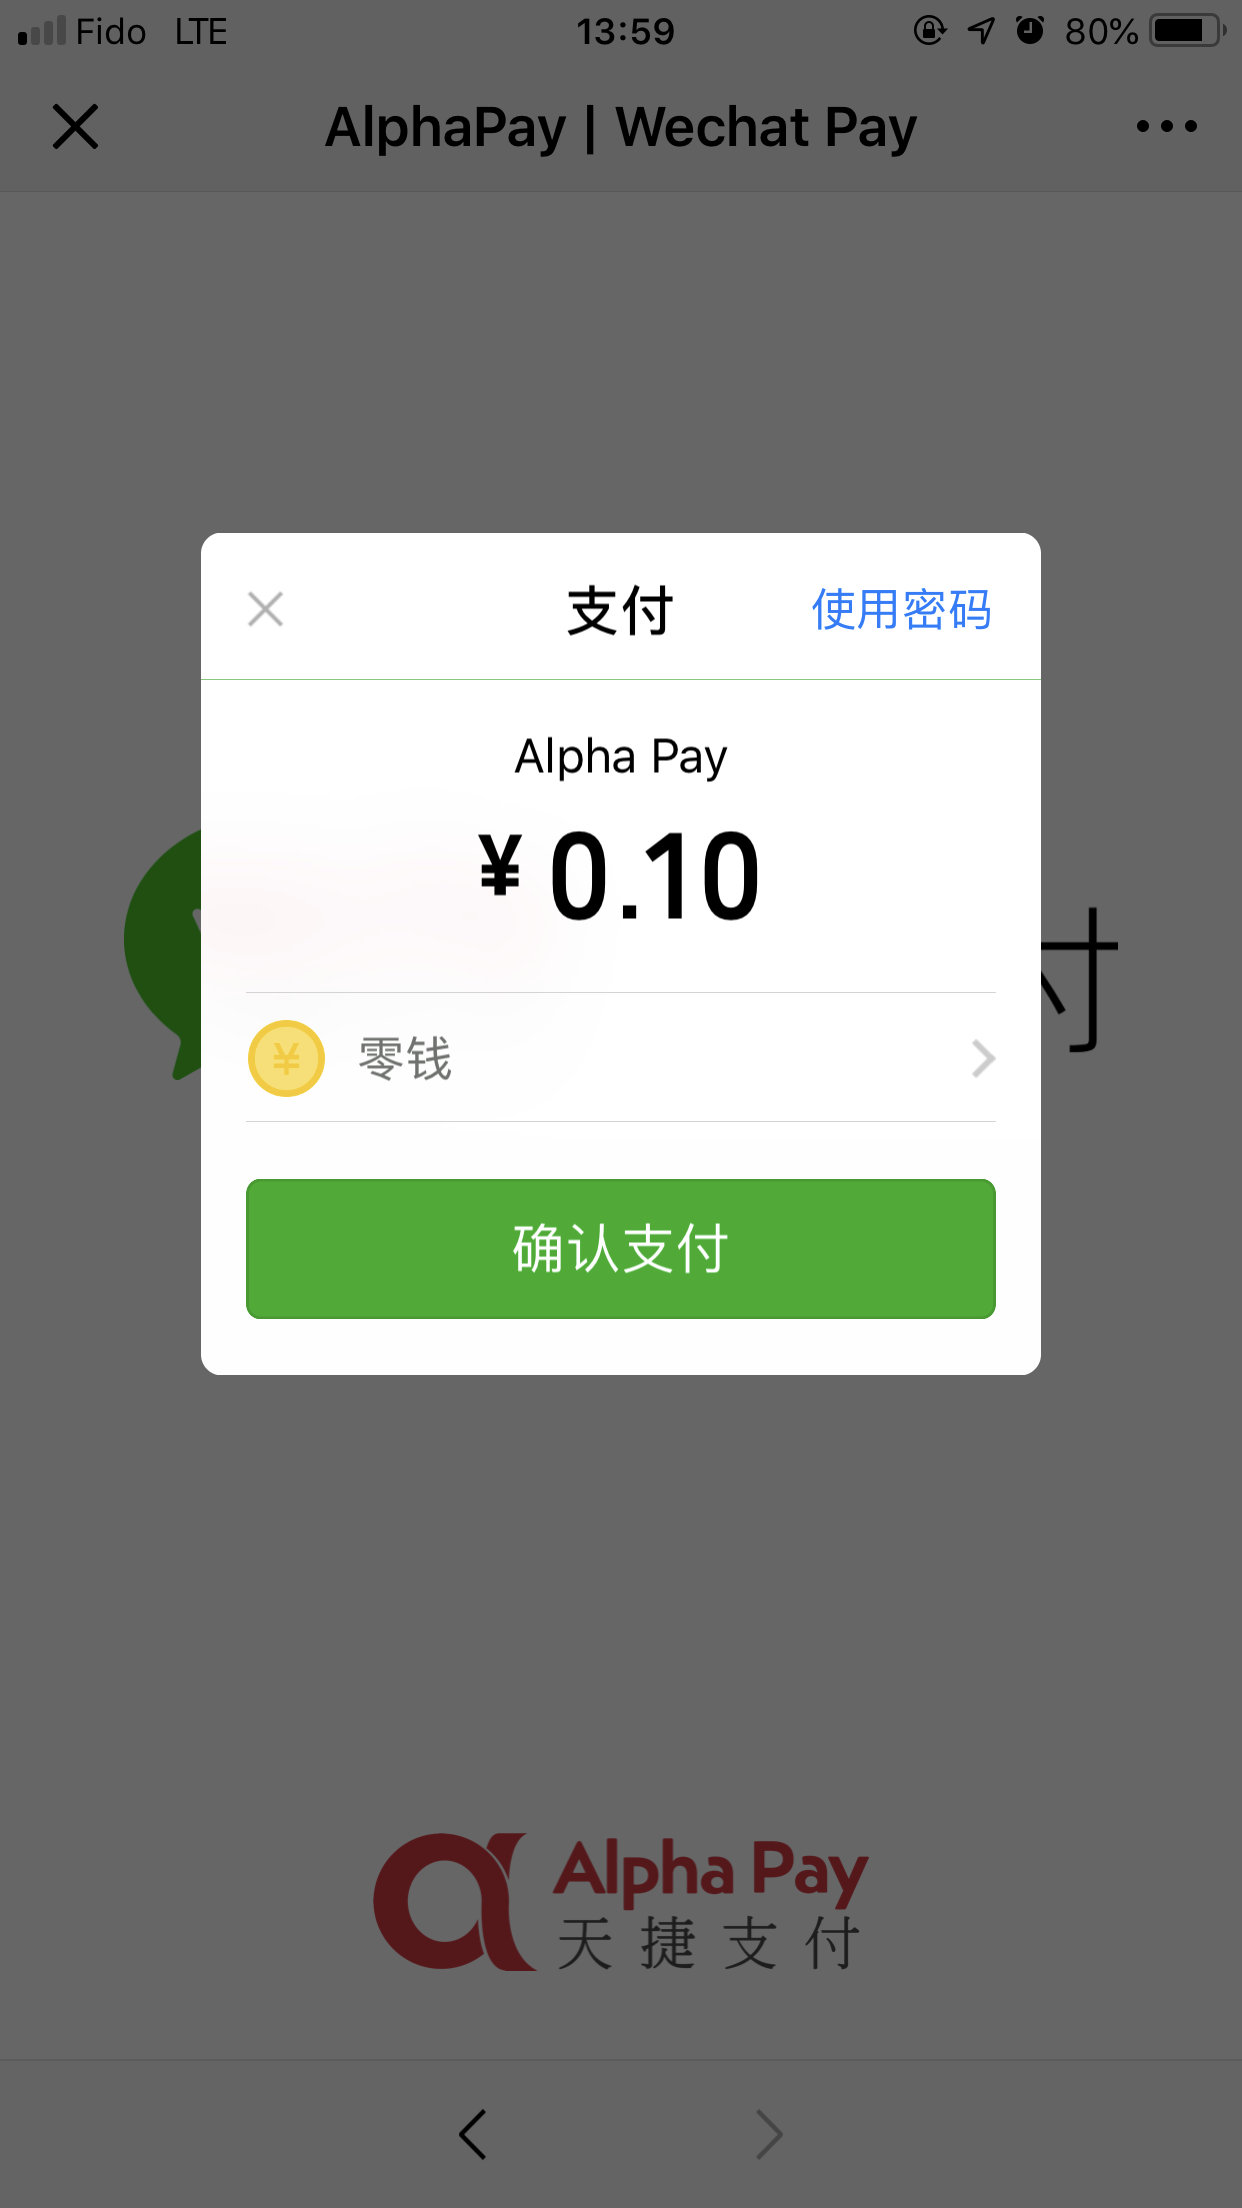 Alipay QR Code (in AlphaPay Page)